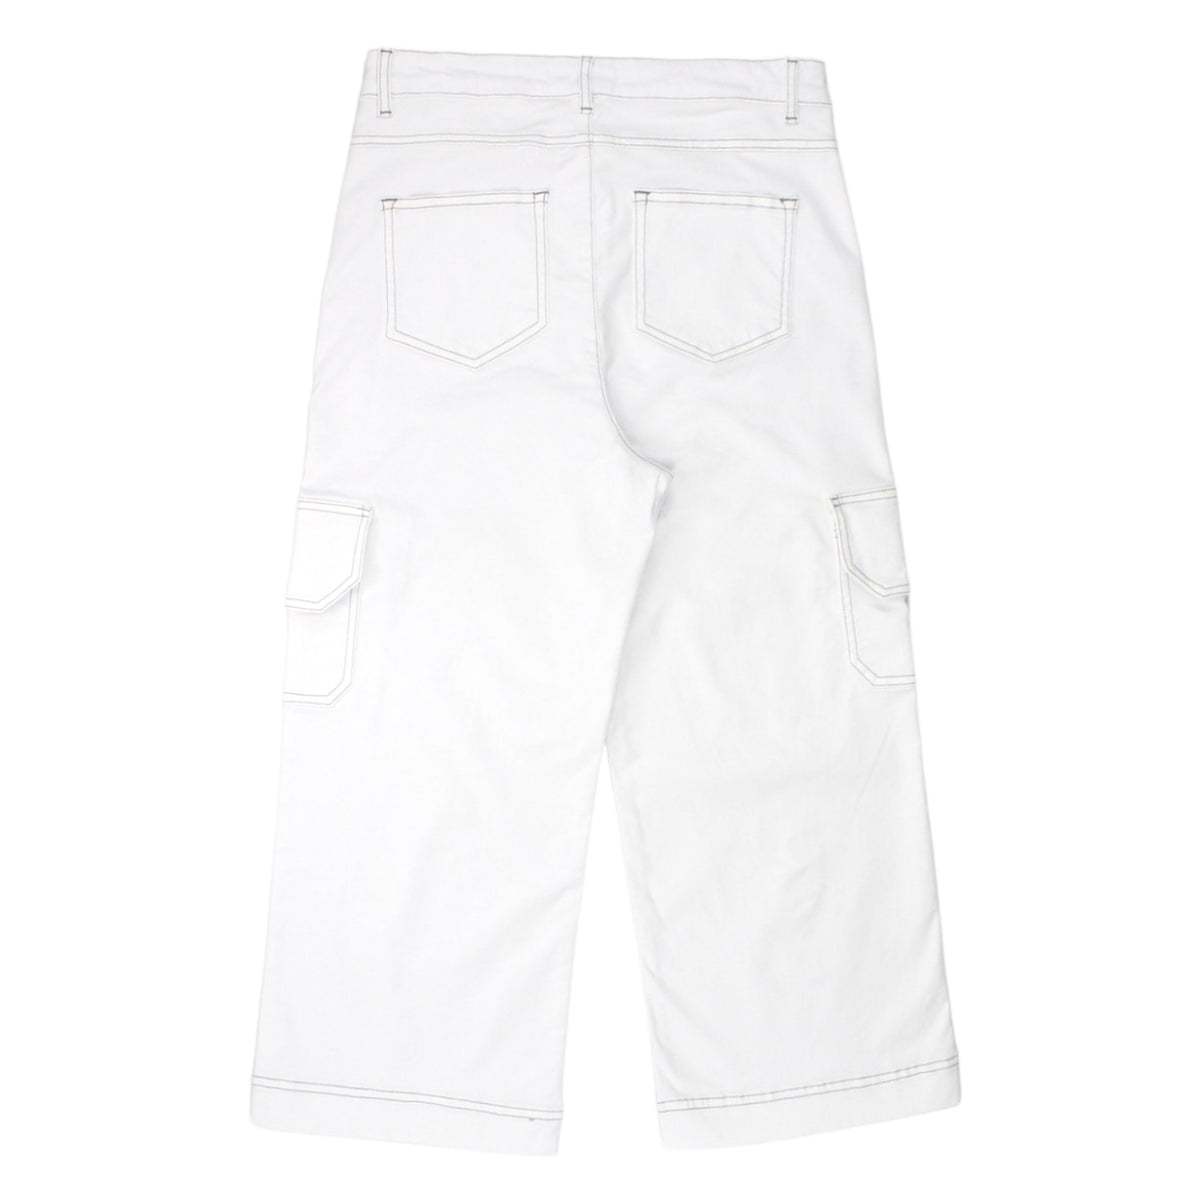 NRBY White Wide Cropped Jeans - Sample